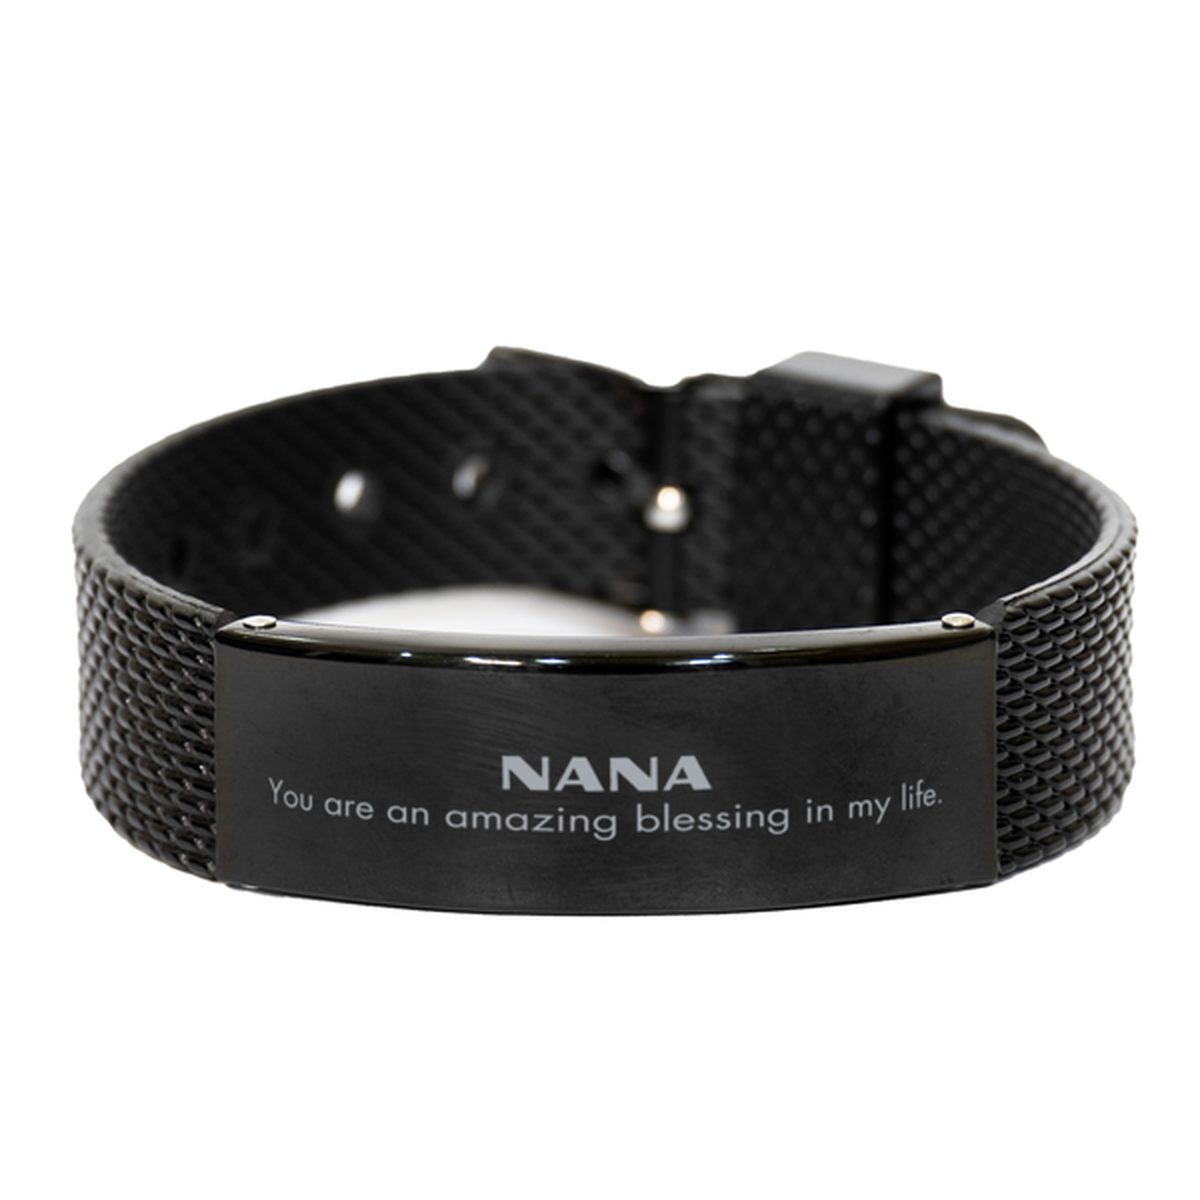 Nana Black Shark Mesh Bracelet, You are an amazing blessing in my life, Thank You Gifts For Nana, Inspirational Birthday Christmas Unique Gifts For Nana